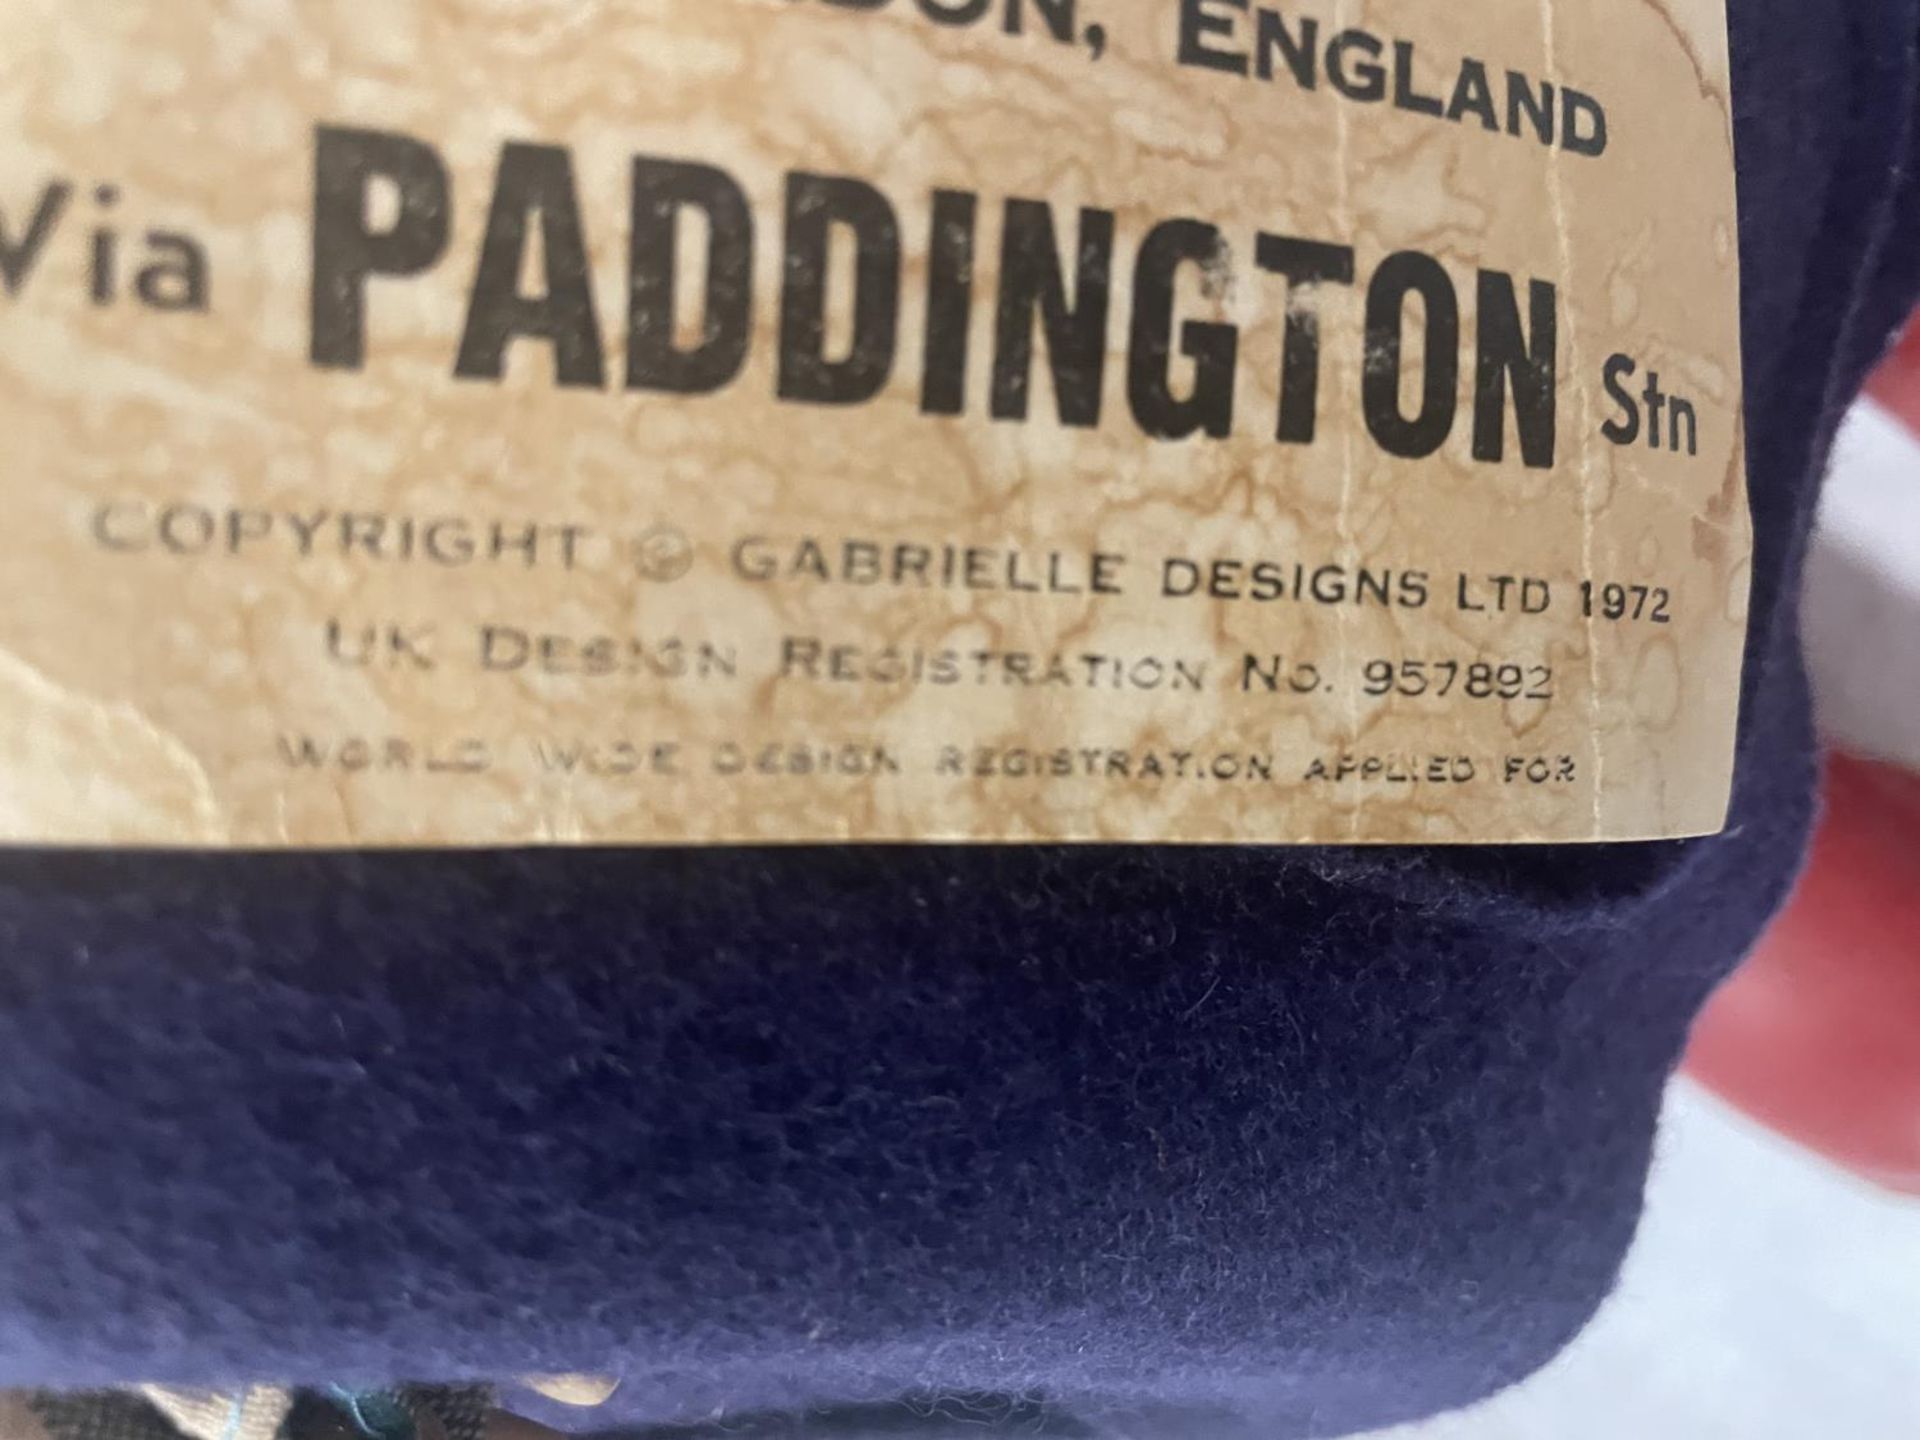 A PADDINGTON BEAR FIGURE WITH LABEL STATING GABRIELLE DESIGNS 1972, DESIGN NUMBER 957892 - Image 5 of 7